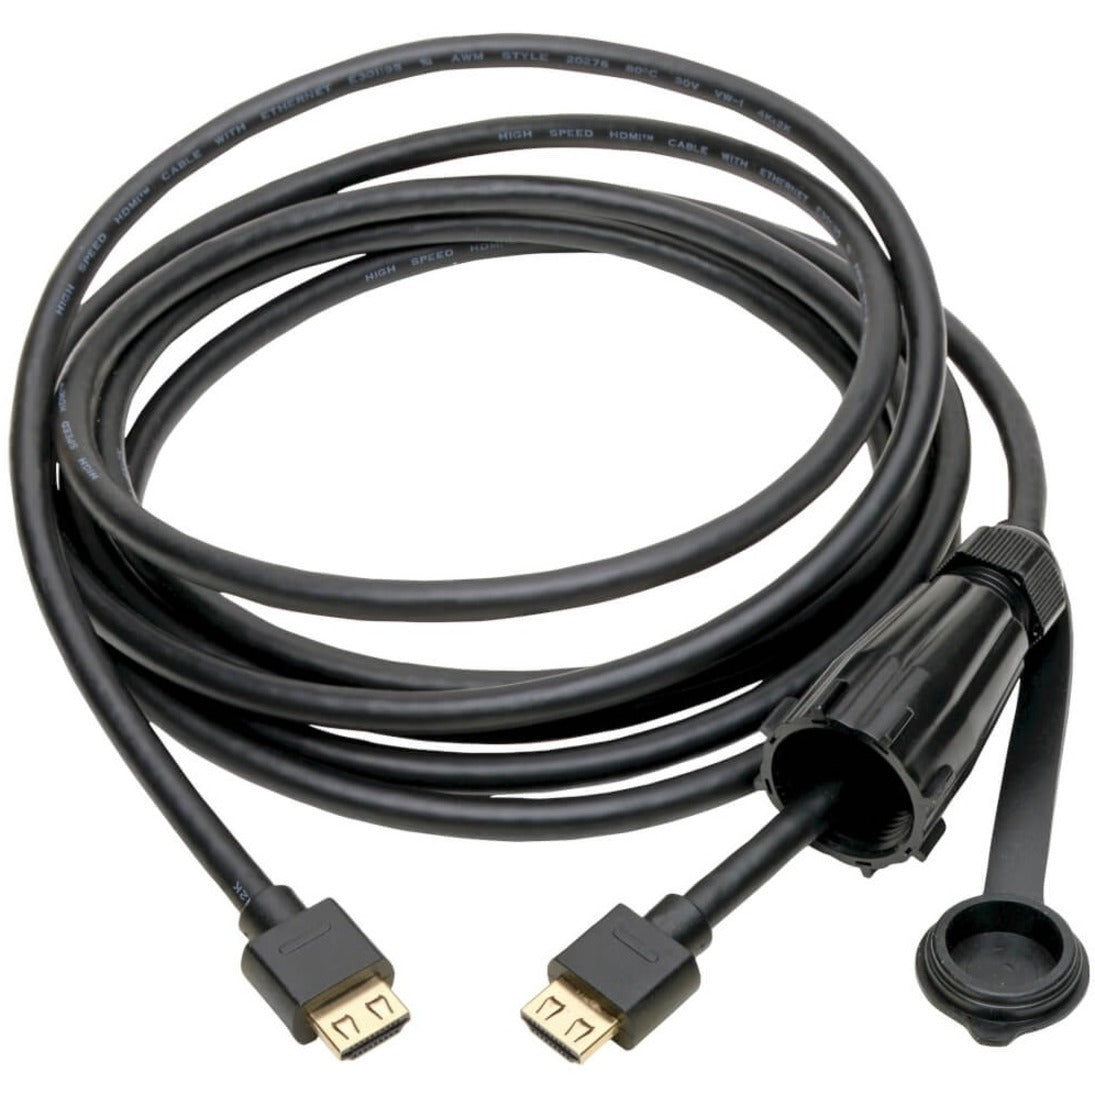 Tripp Lite P569-012-IND HDMI Audio/Video Cable With Ethernet, Water Resistant, Flexible, 12 ft